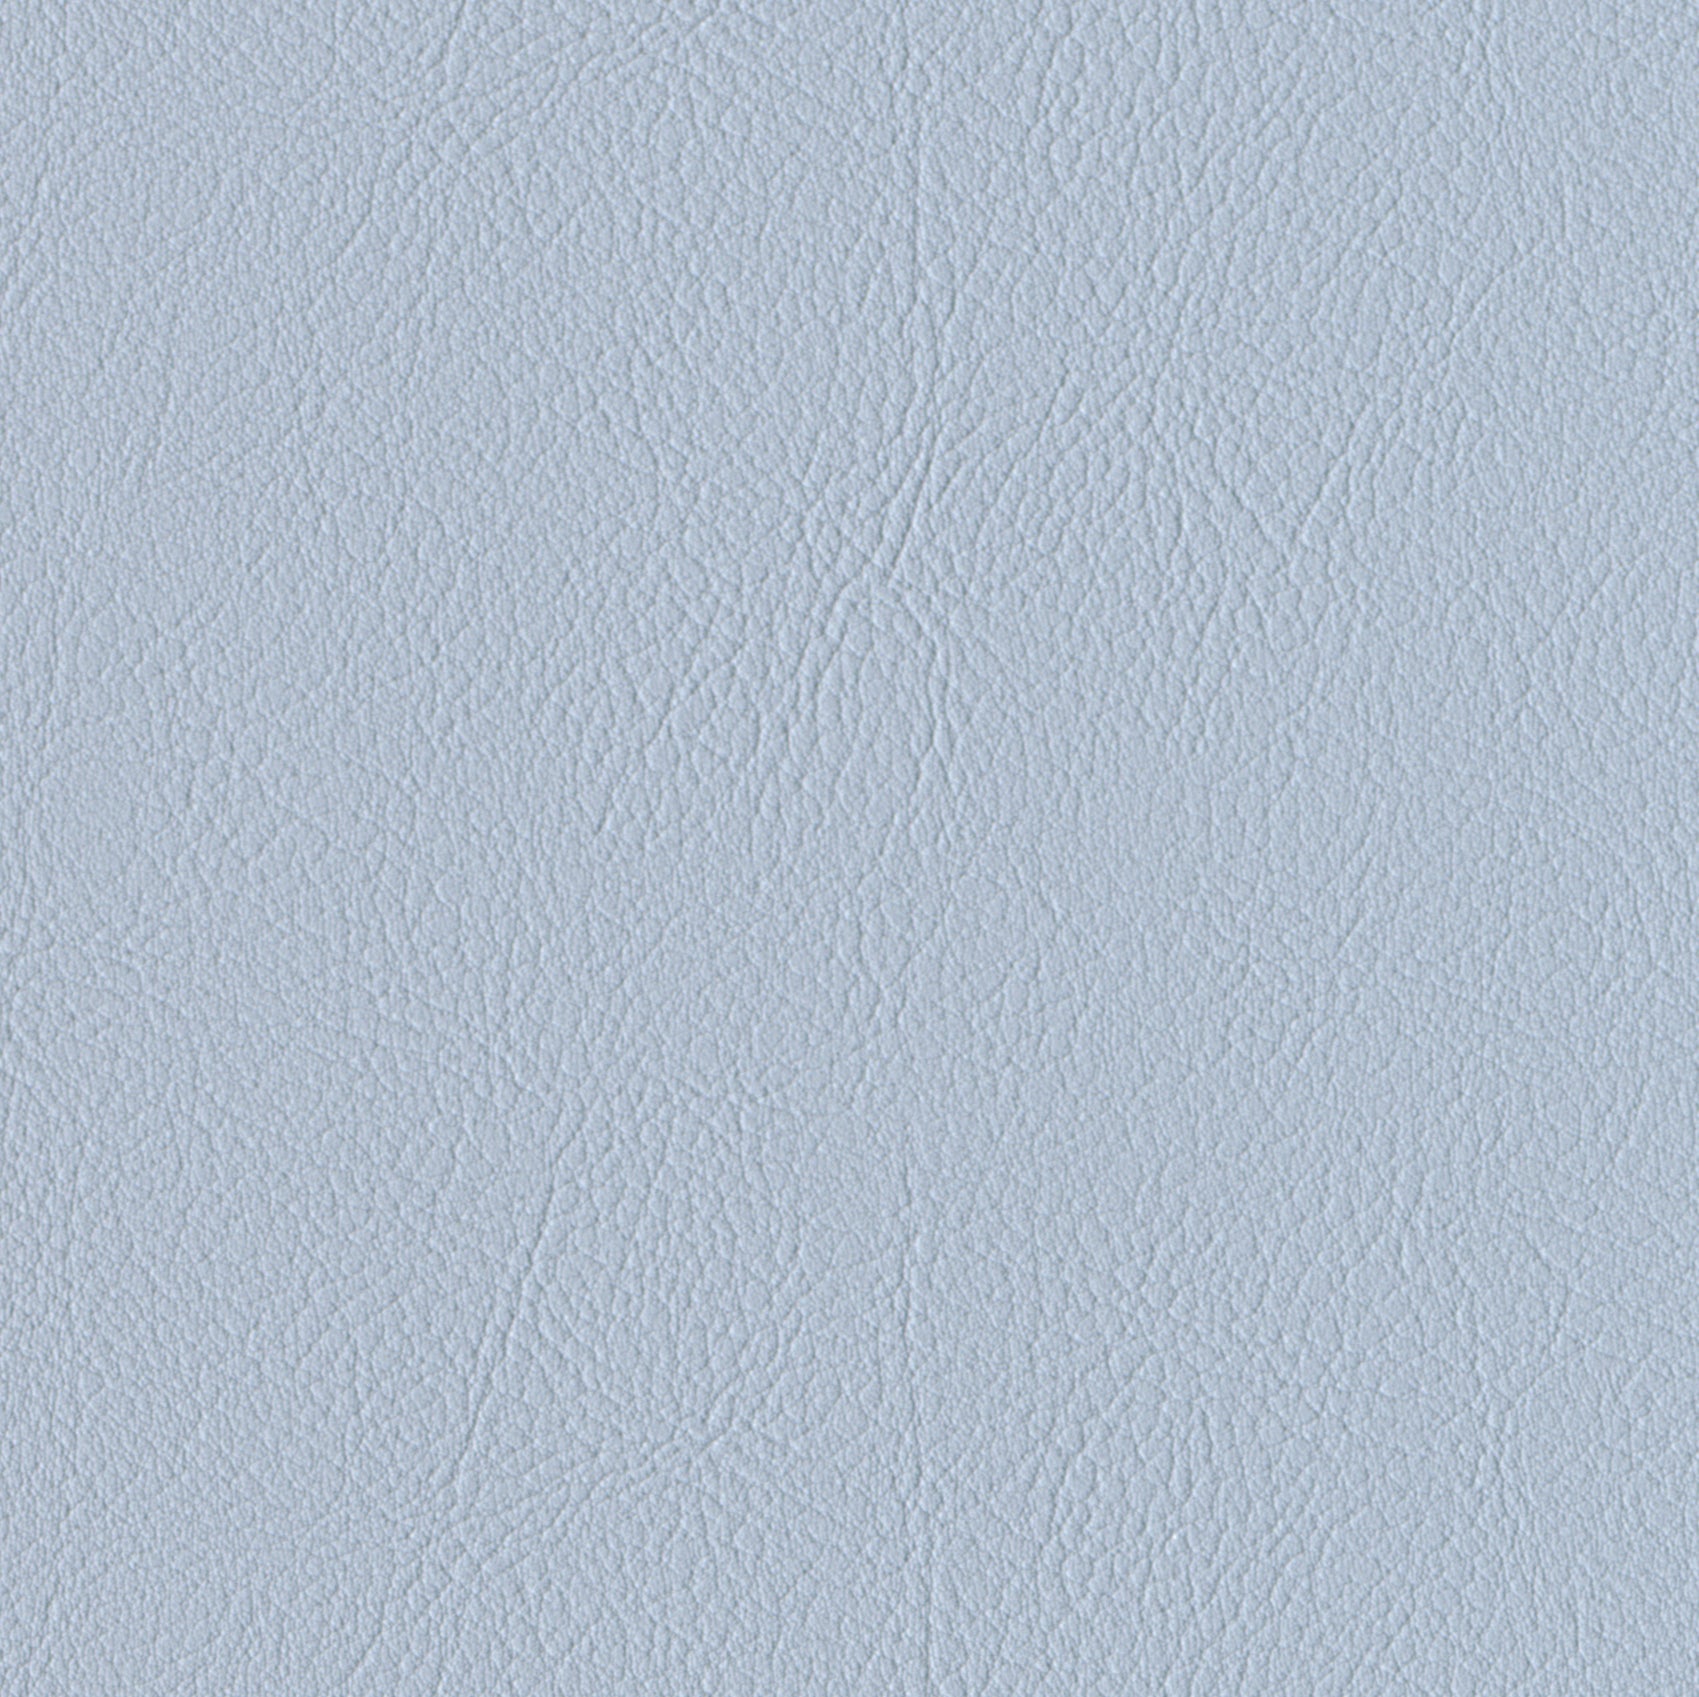    Andriali-Contract-Vinyl_Upholstery-Design-LegacyFR-Color-503FrenchBlue-Width-140cm